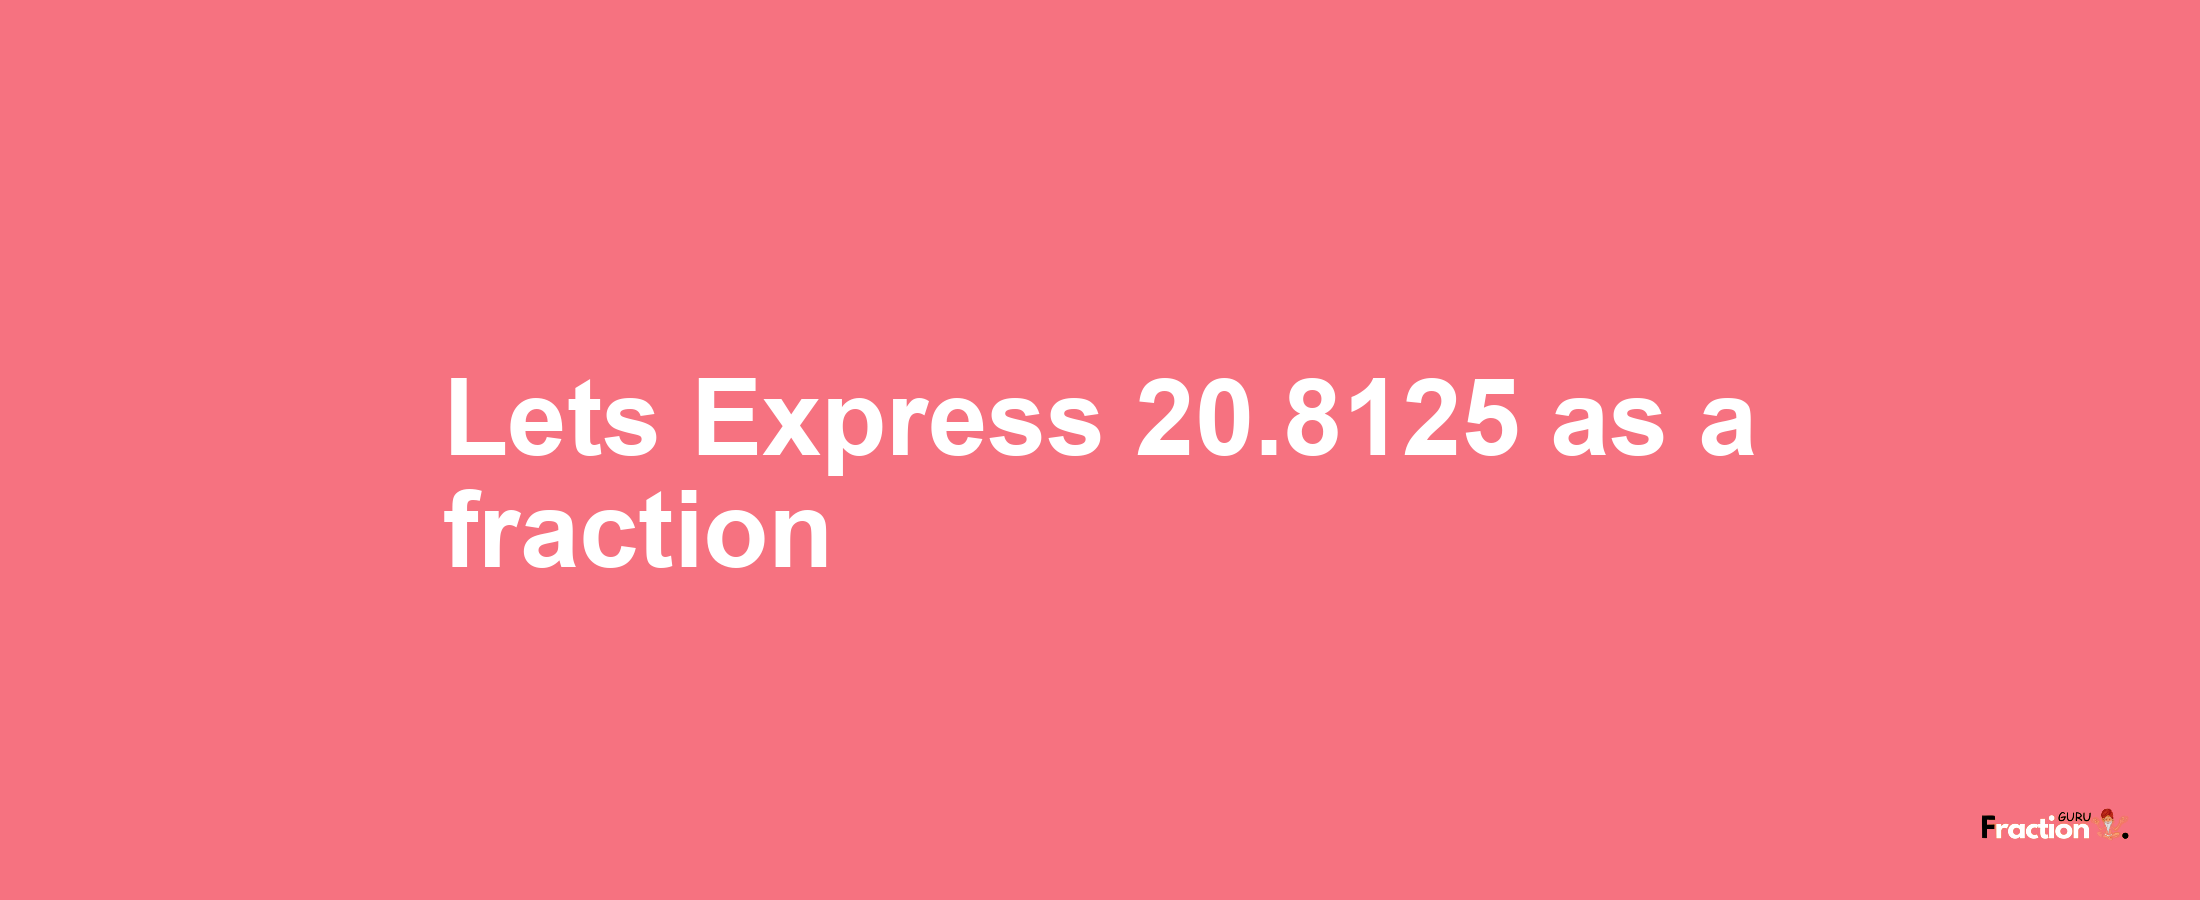 Lets Express 20.8125 as afraction